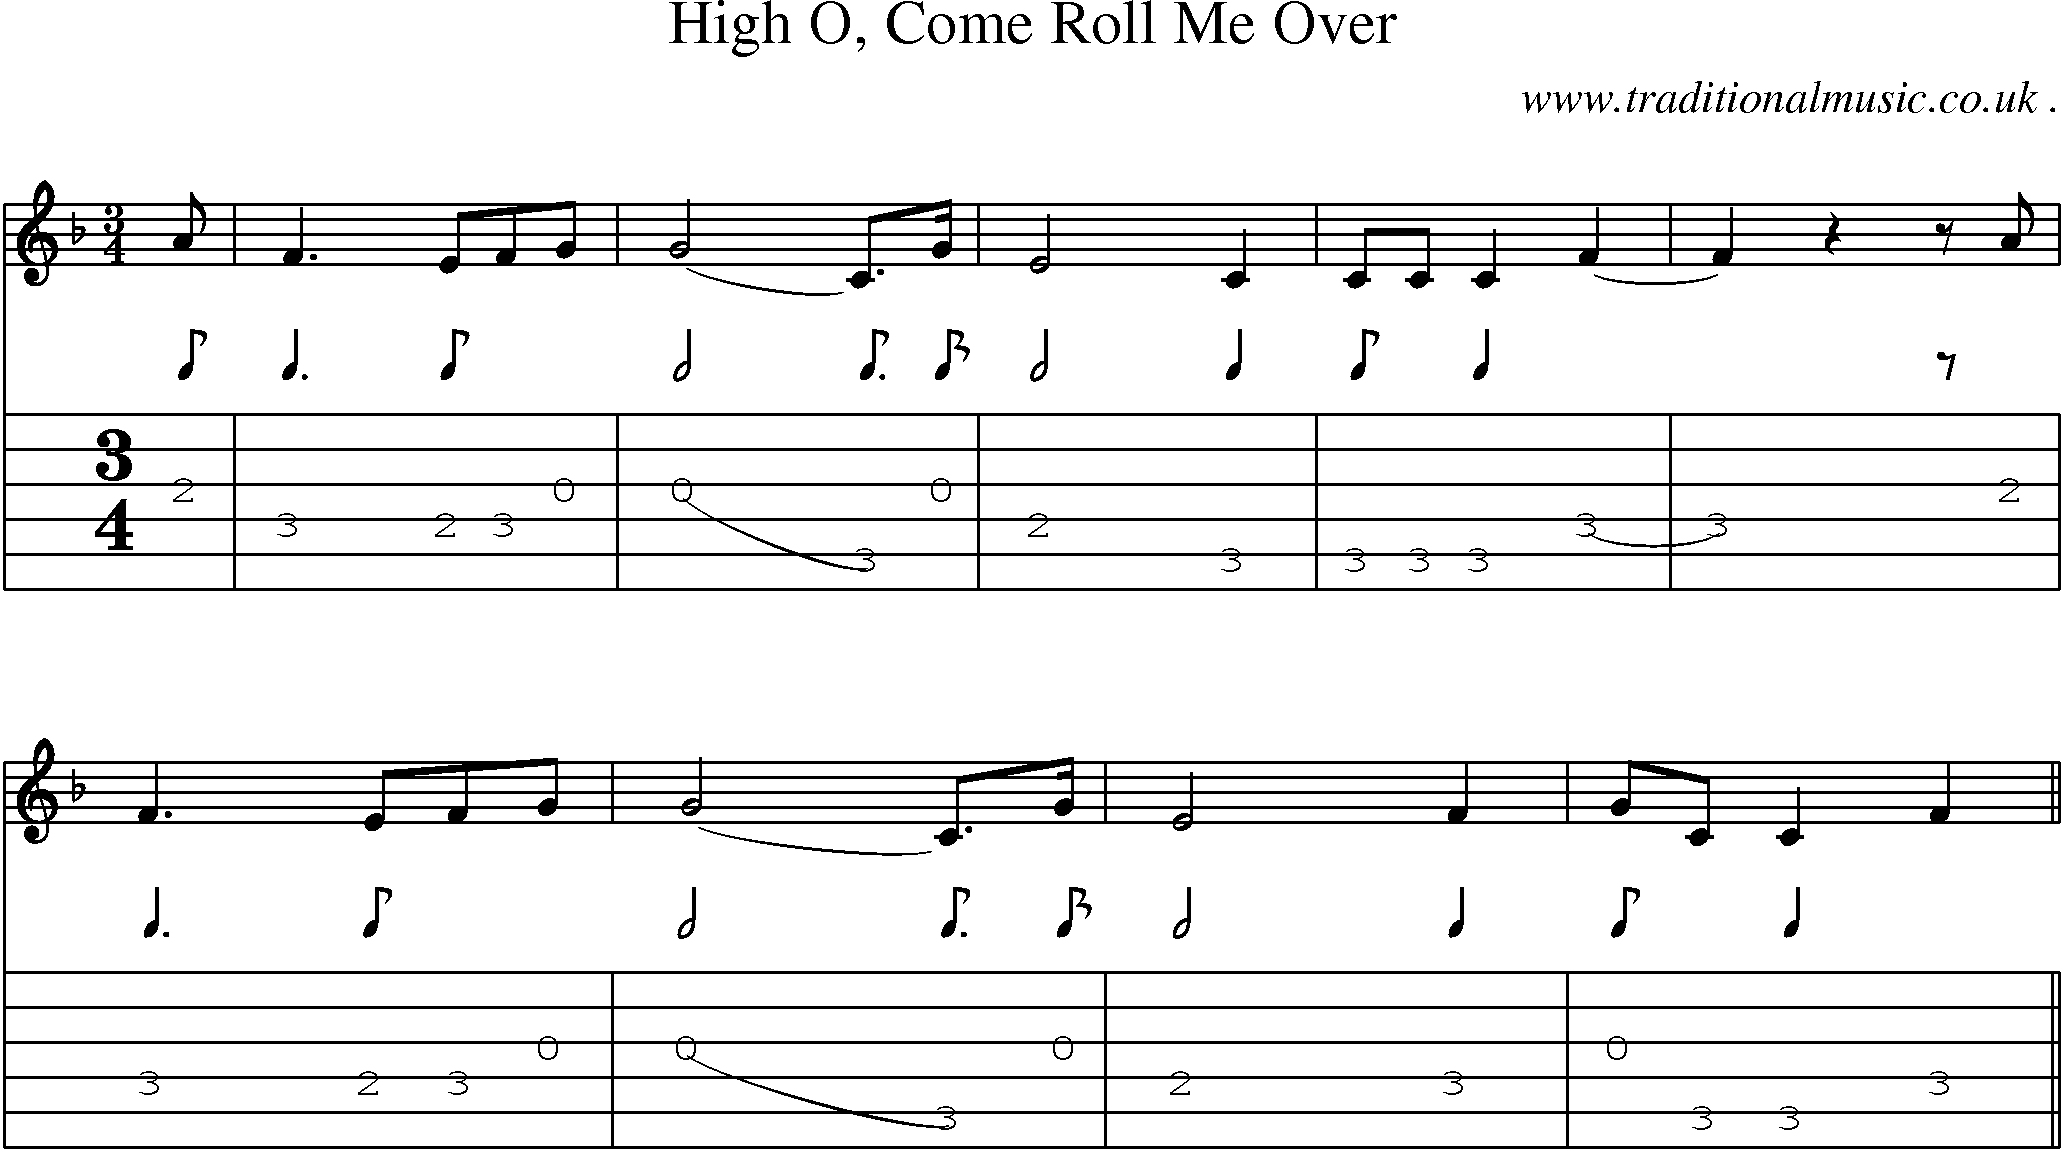 Sheet-Music and Guitar Tabs for High O Come Roll Me Over